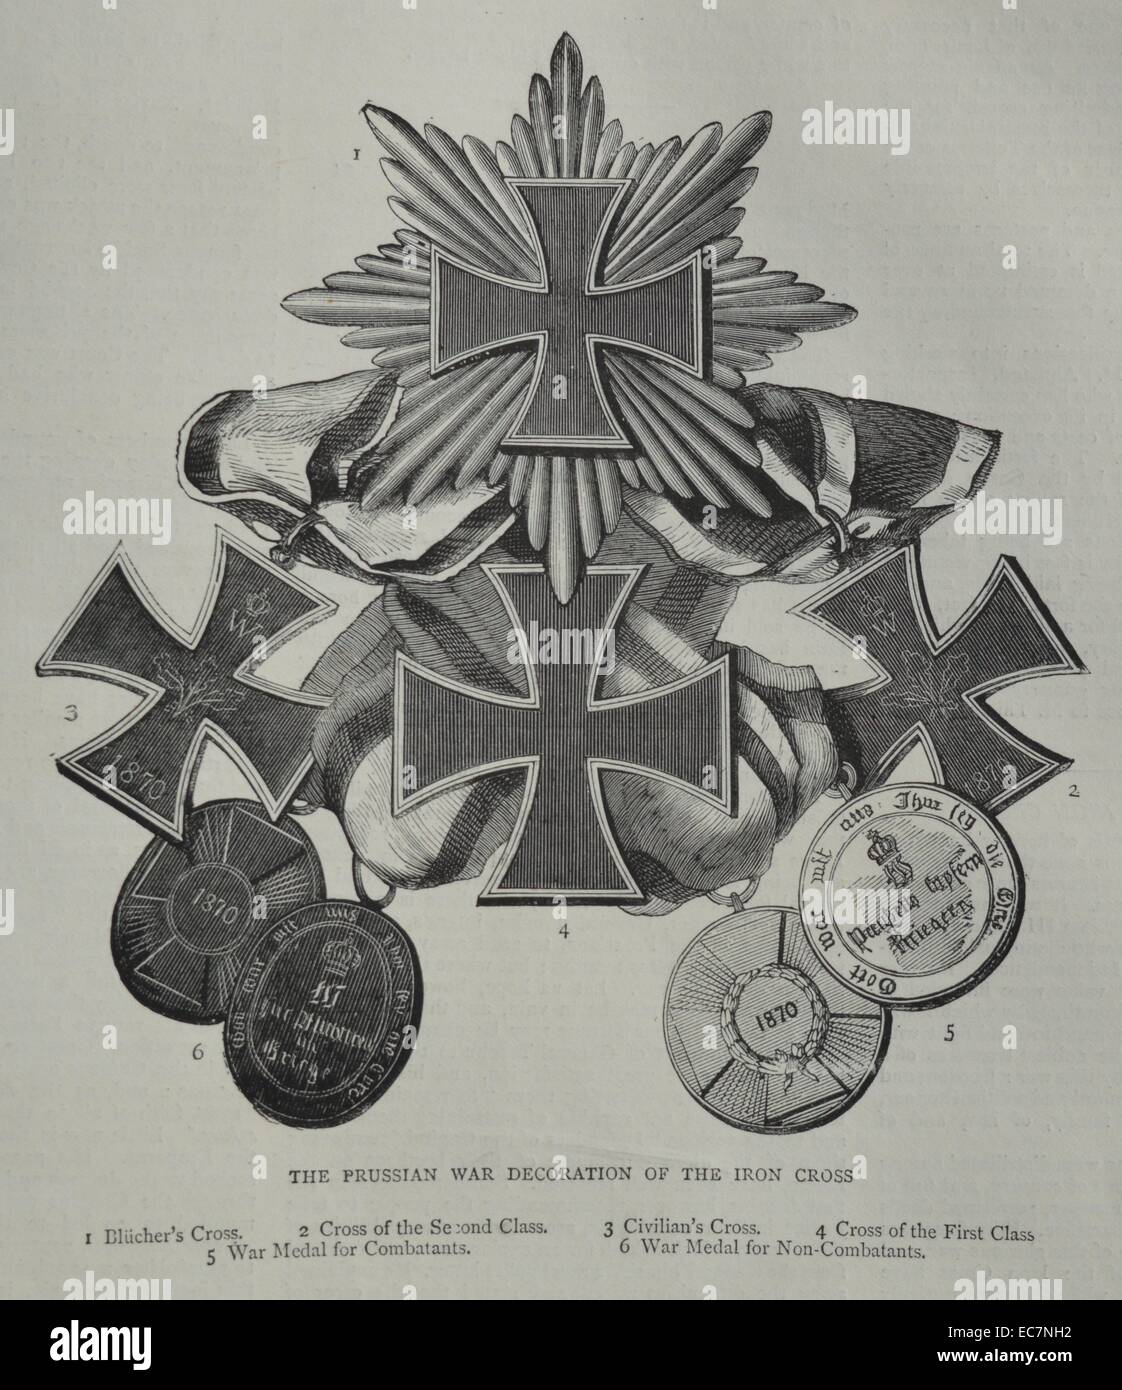 Engraving of the Prussian war decoration of the Iron Cross. 1. Blücher's Cross, 2. Cross of the Second Class, 3. Civilian's Cross, 4. Cross of the First Class, 5. War Medal for Combatants, 6. War Medal for Non-Combatants. Dated 1870 Stock Photo